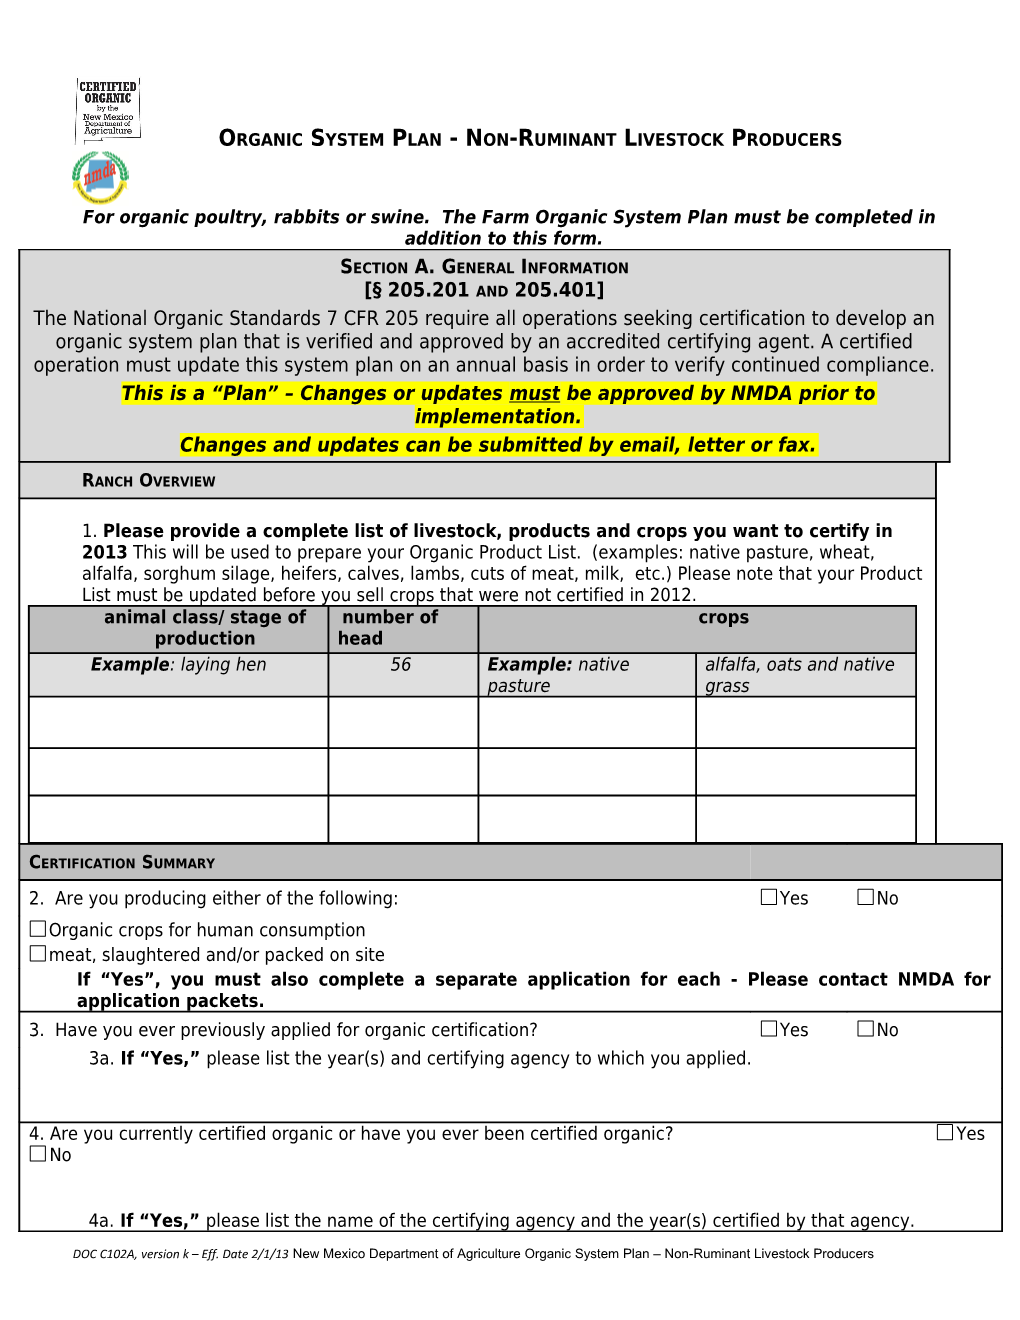 This Form Is to Be Completed by Operators Who Wish to Include Non-Ruminant Livestock Production